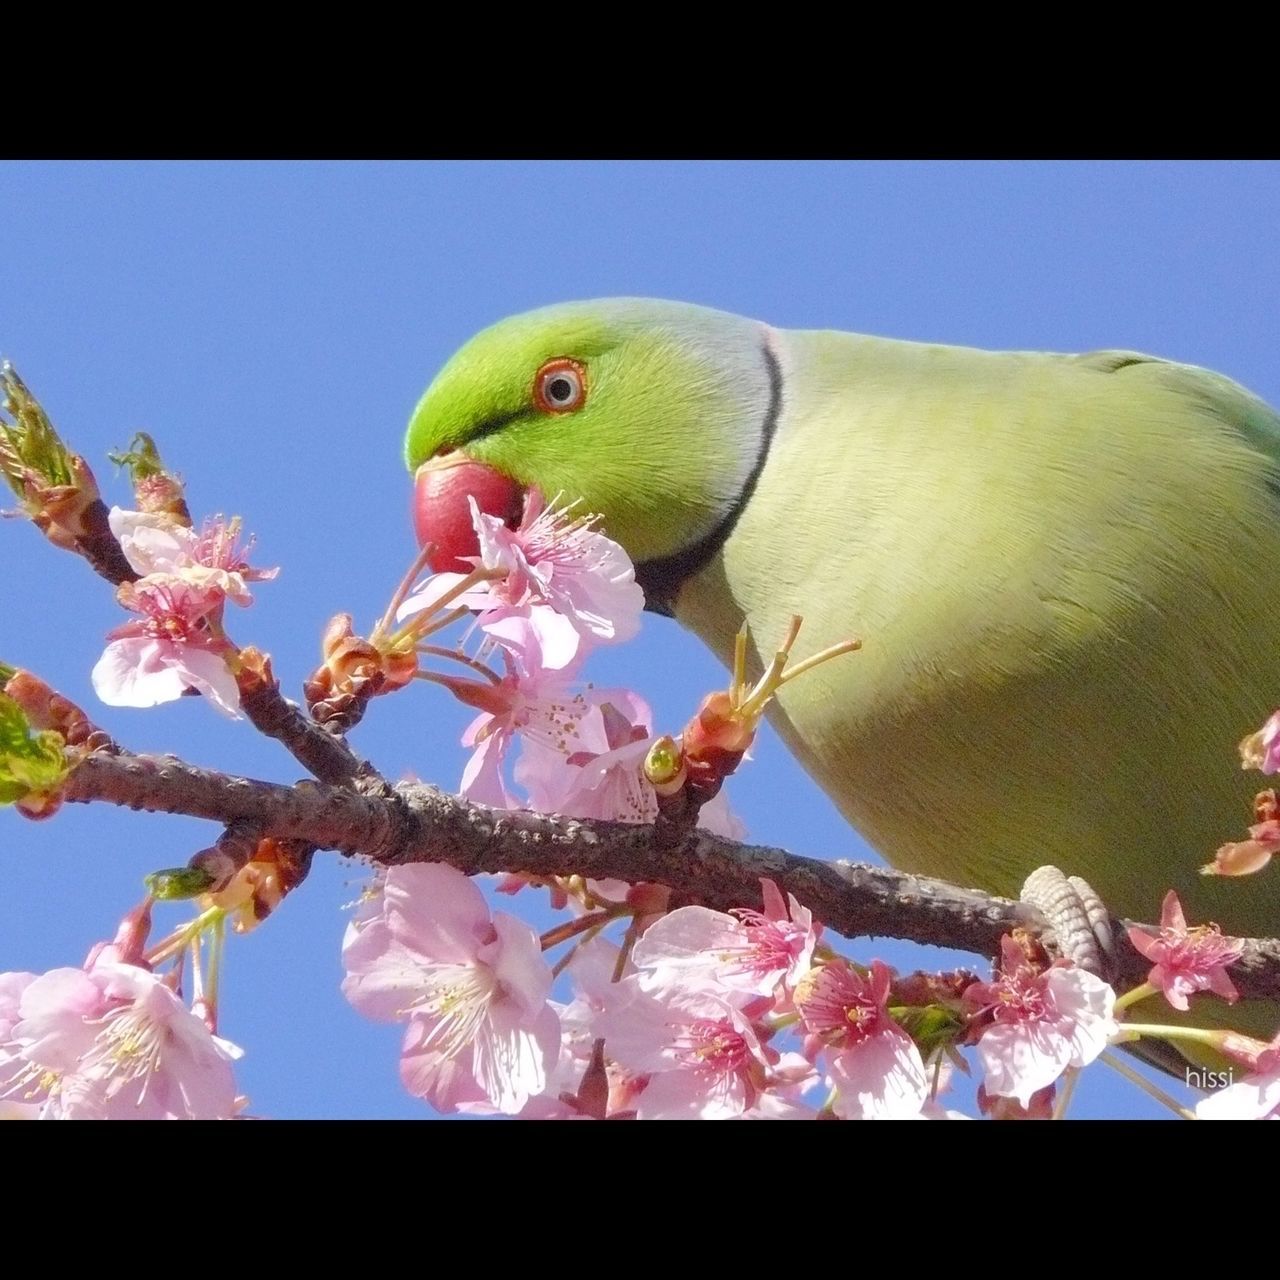 animal themes, low angle view, flower, transfer print, bird, one animal, branch, wildlife, animals in the wild, auto post production filter, clear sky, close-up, nature, freshness, perching, tree, beauty in nature, no people, blossom, growth